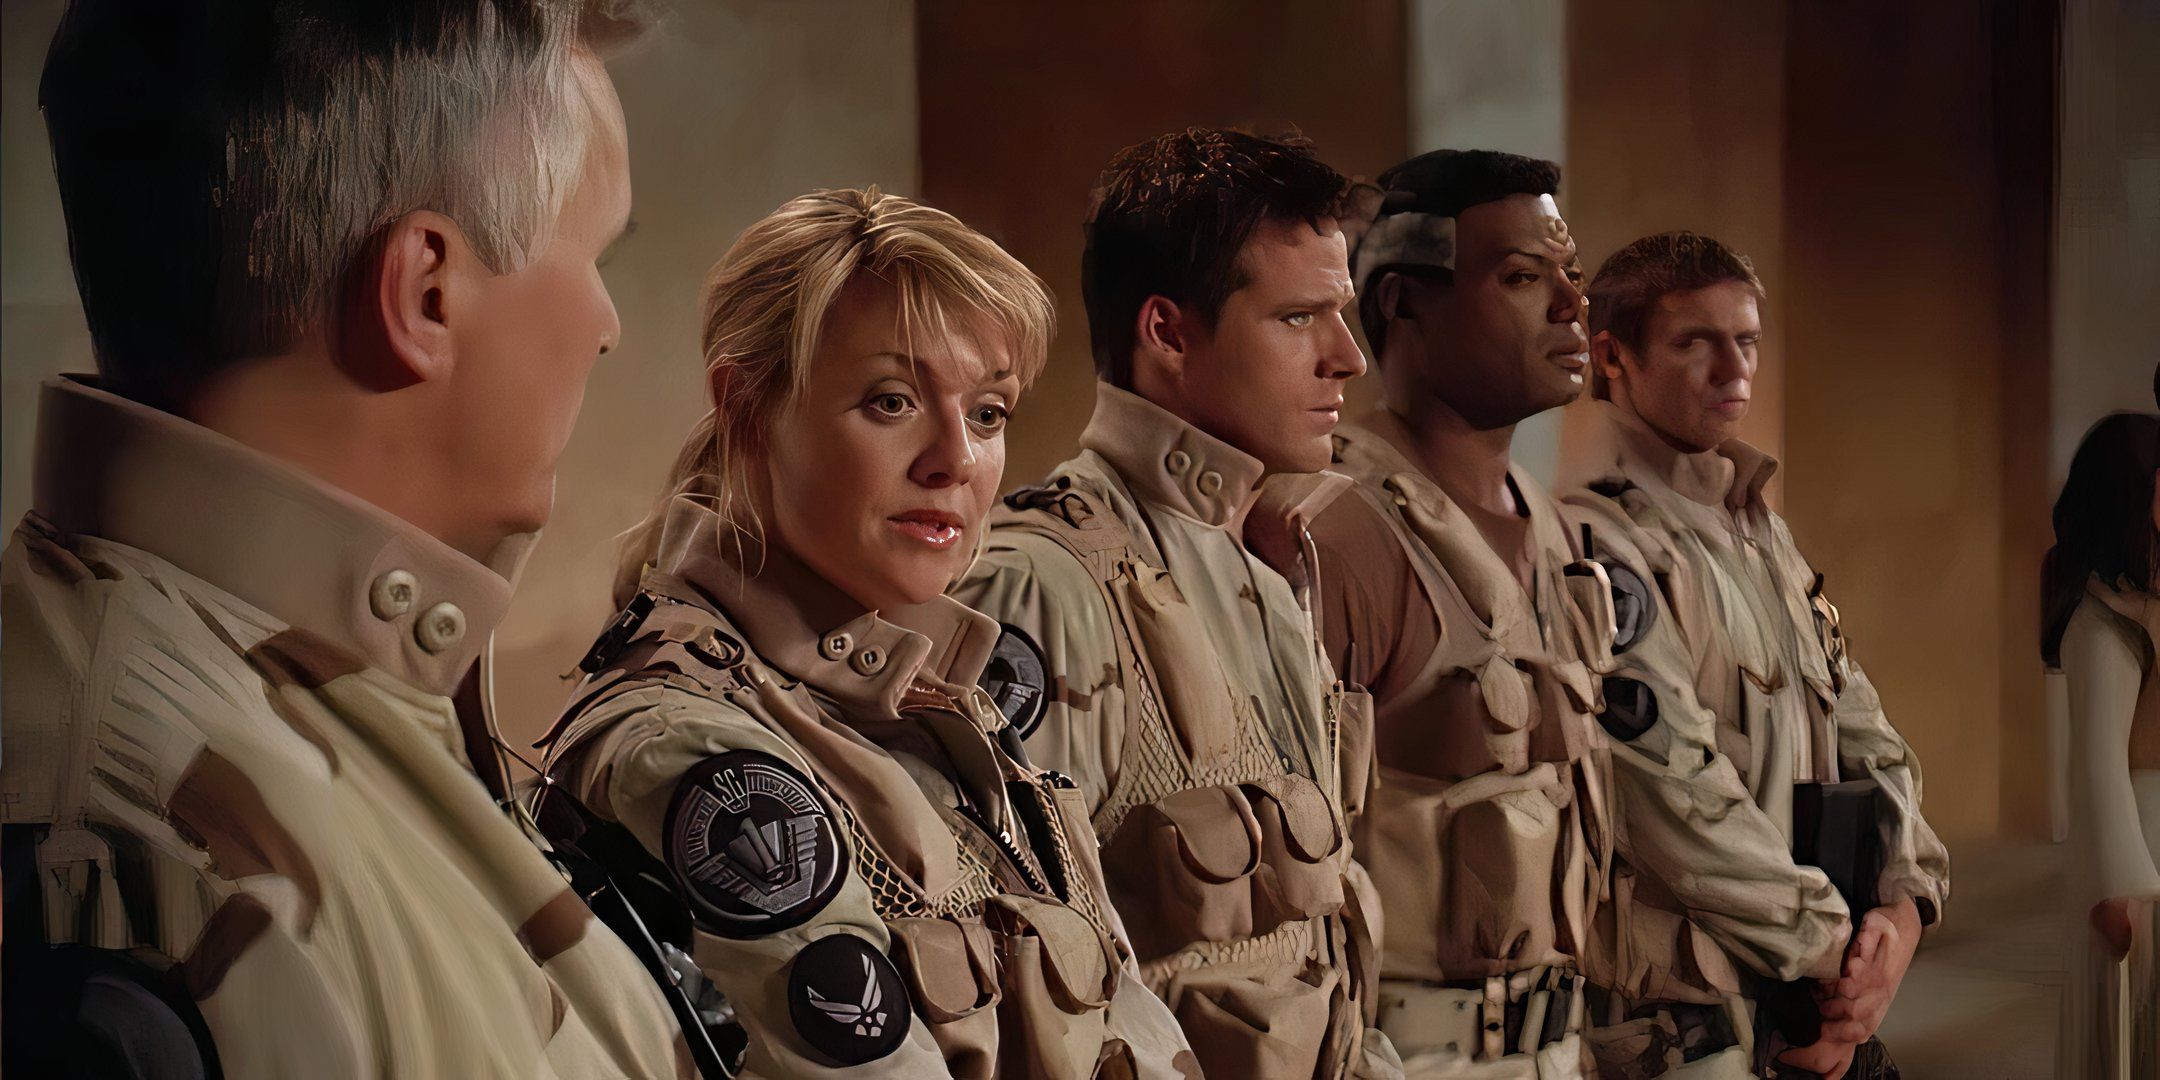 Stargate Continuum - The SG-1 team at Baal's extraction